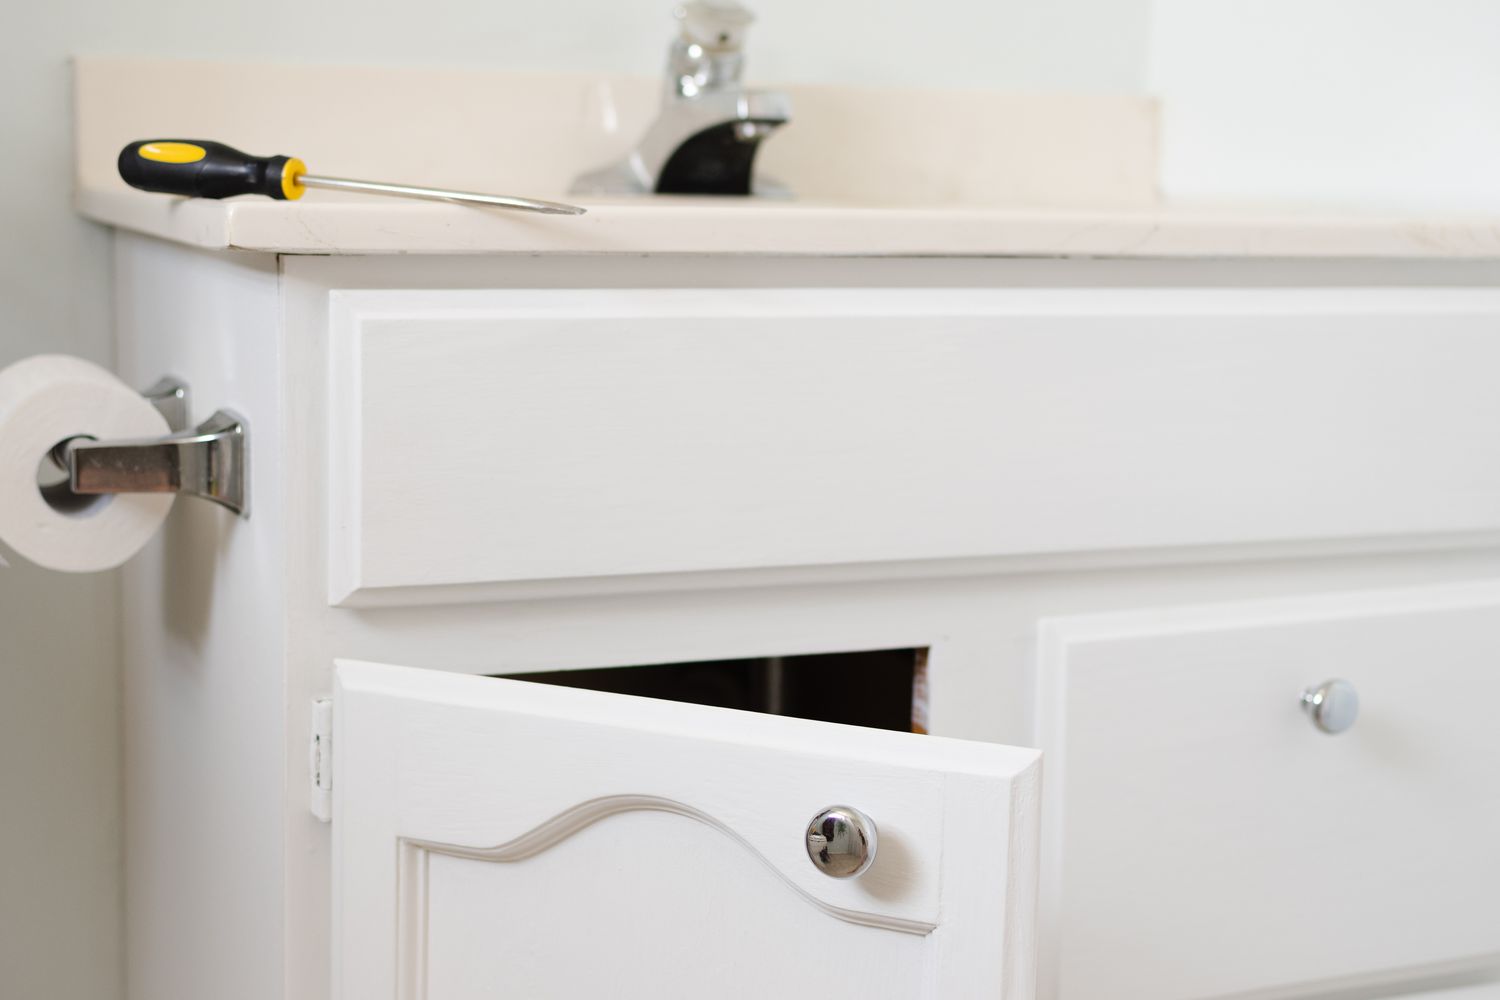 White bathroom cabinets reattached back in place in bathroom with screwdriver